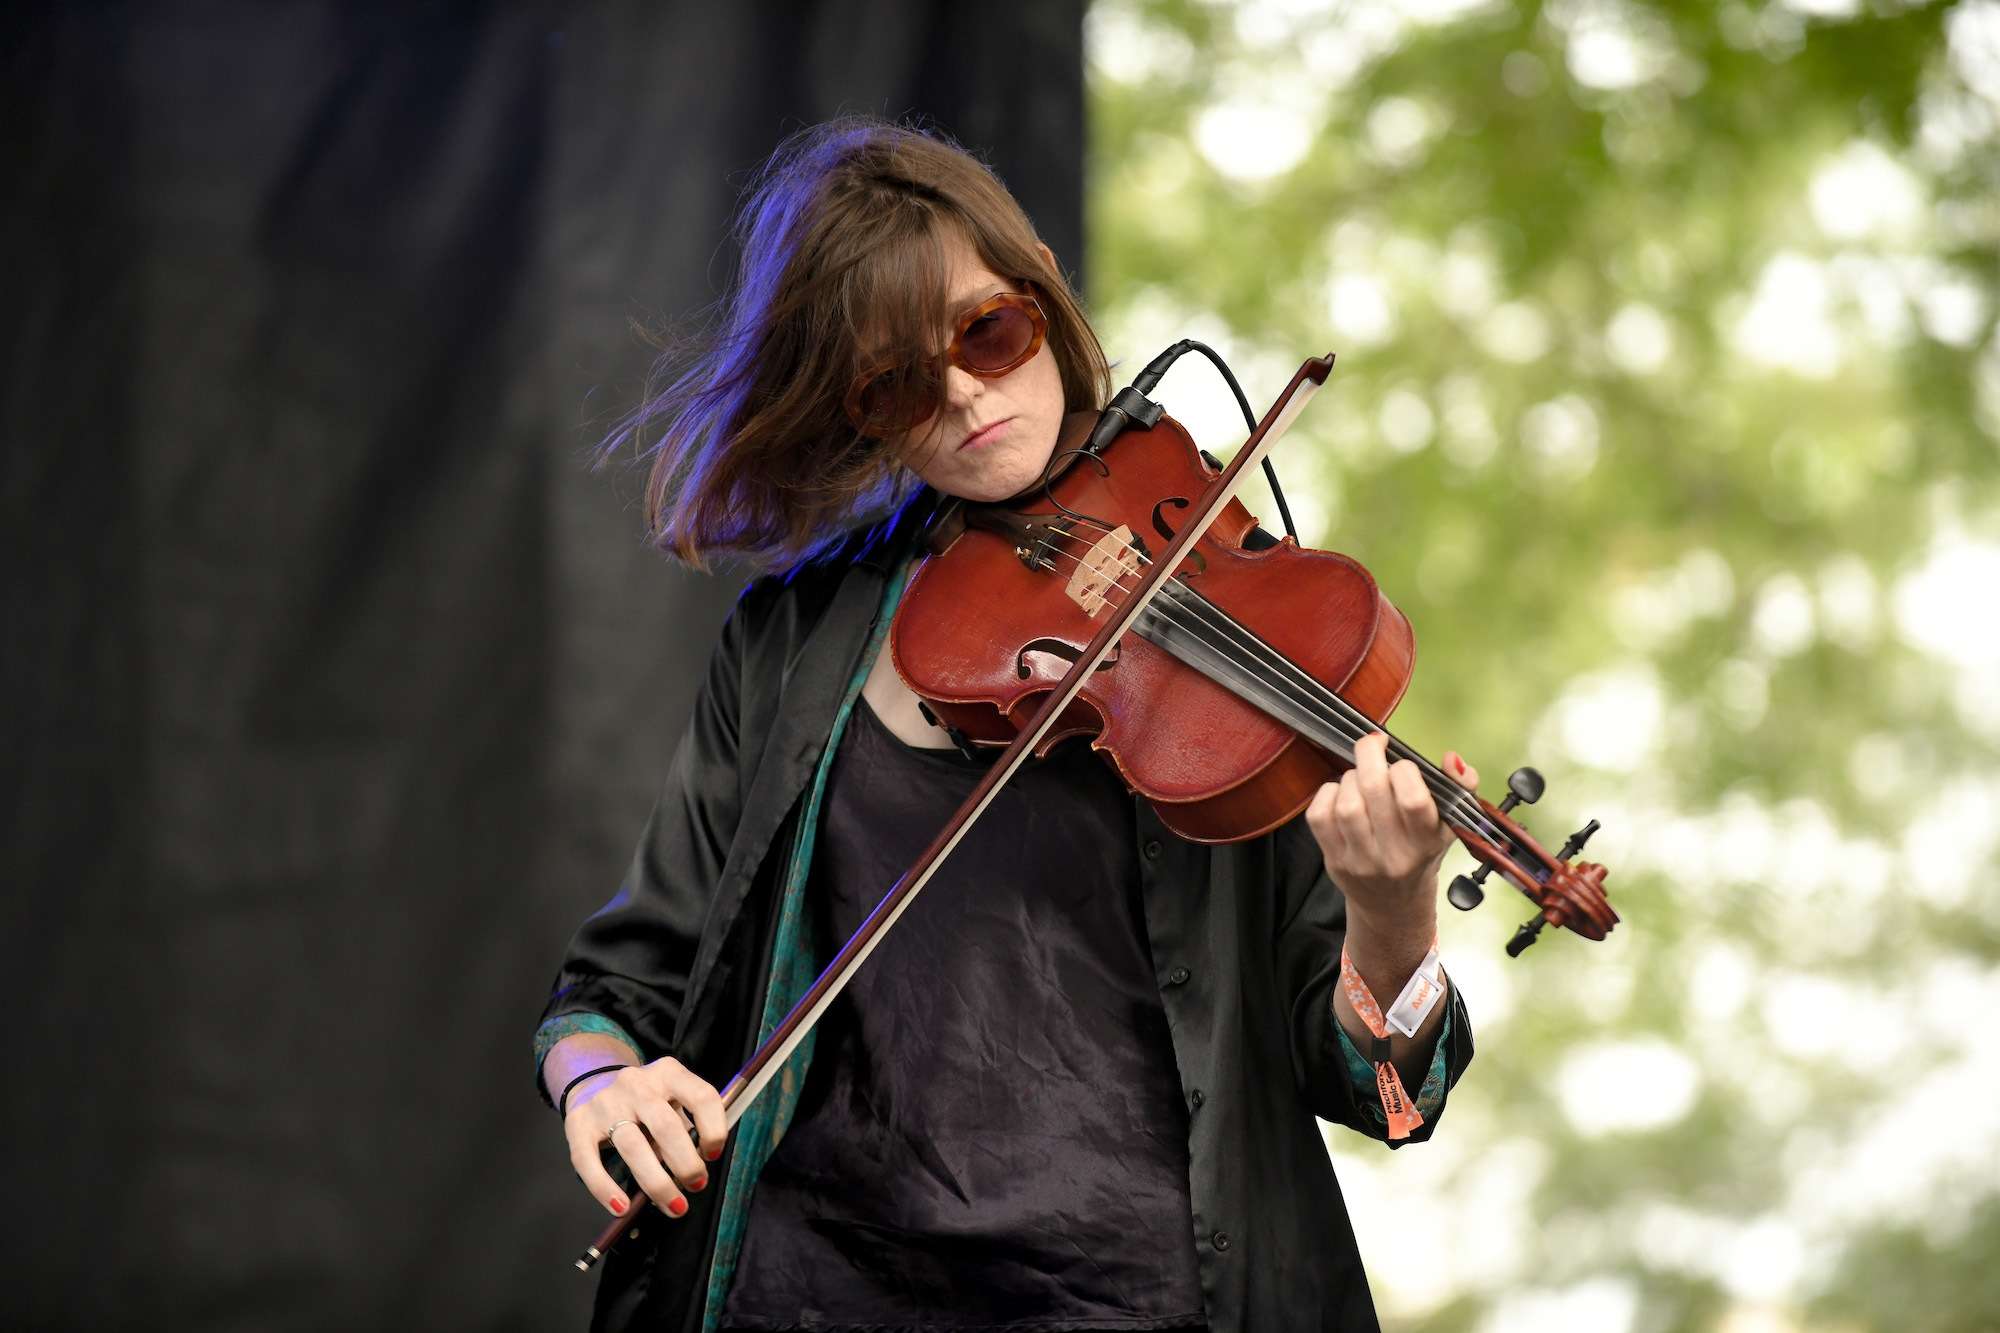 Circuit des Yeux Live at Pitchfork [GALLERY] 9